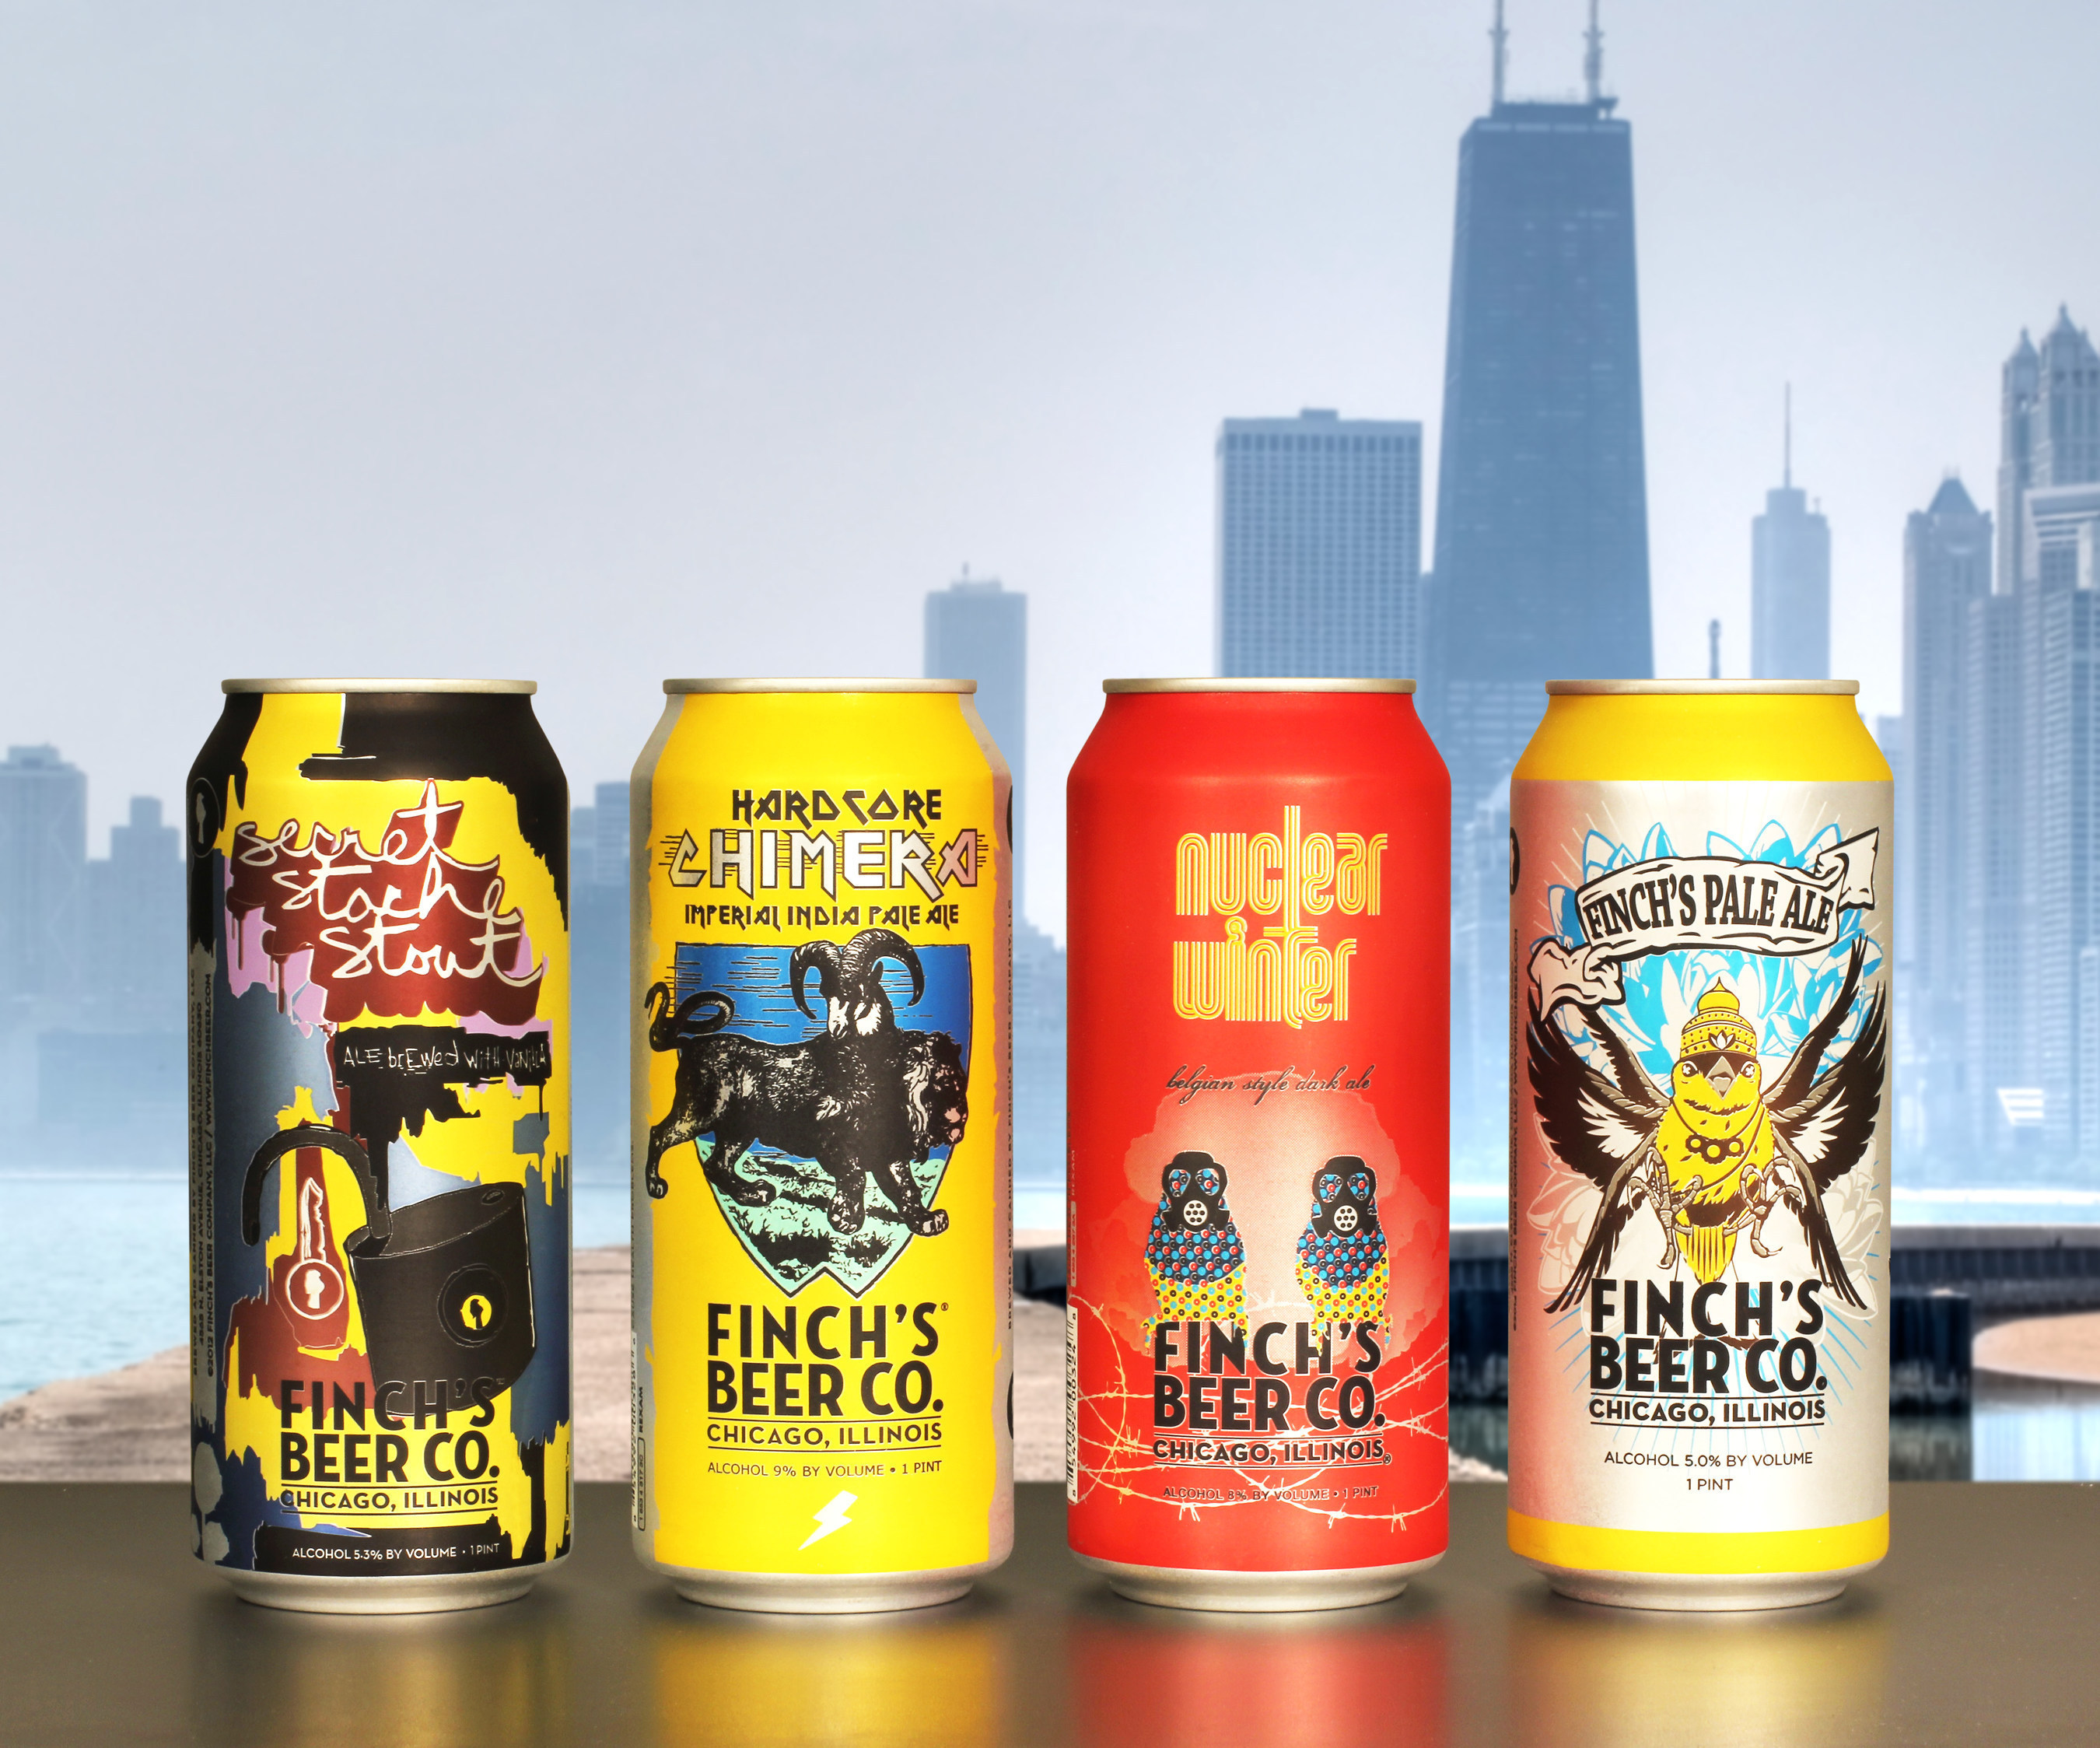 Chicago's Finch's Beer Co. goes local moving to 16 oz. cans from Chicago-based Rexam.